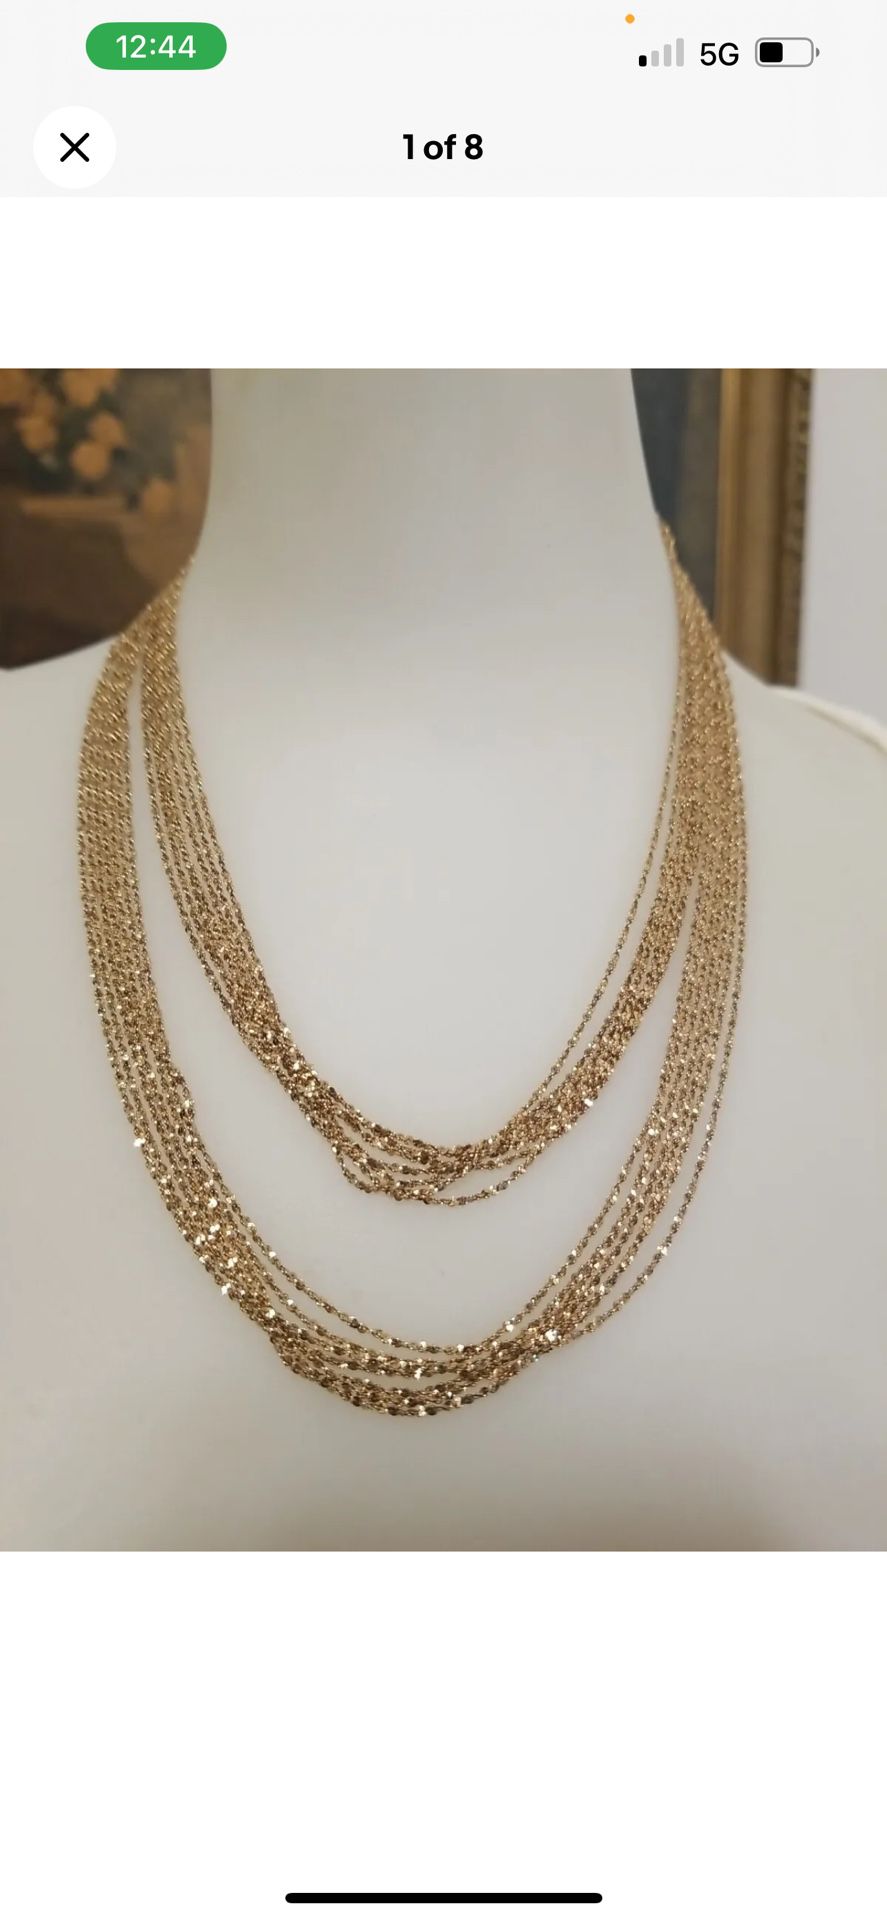 BELLEZA LONG KA1772 ITALY 14KT GE GOLD TONE MULTI CHAIN (7) NECKLACE